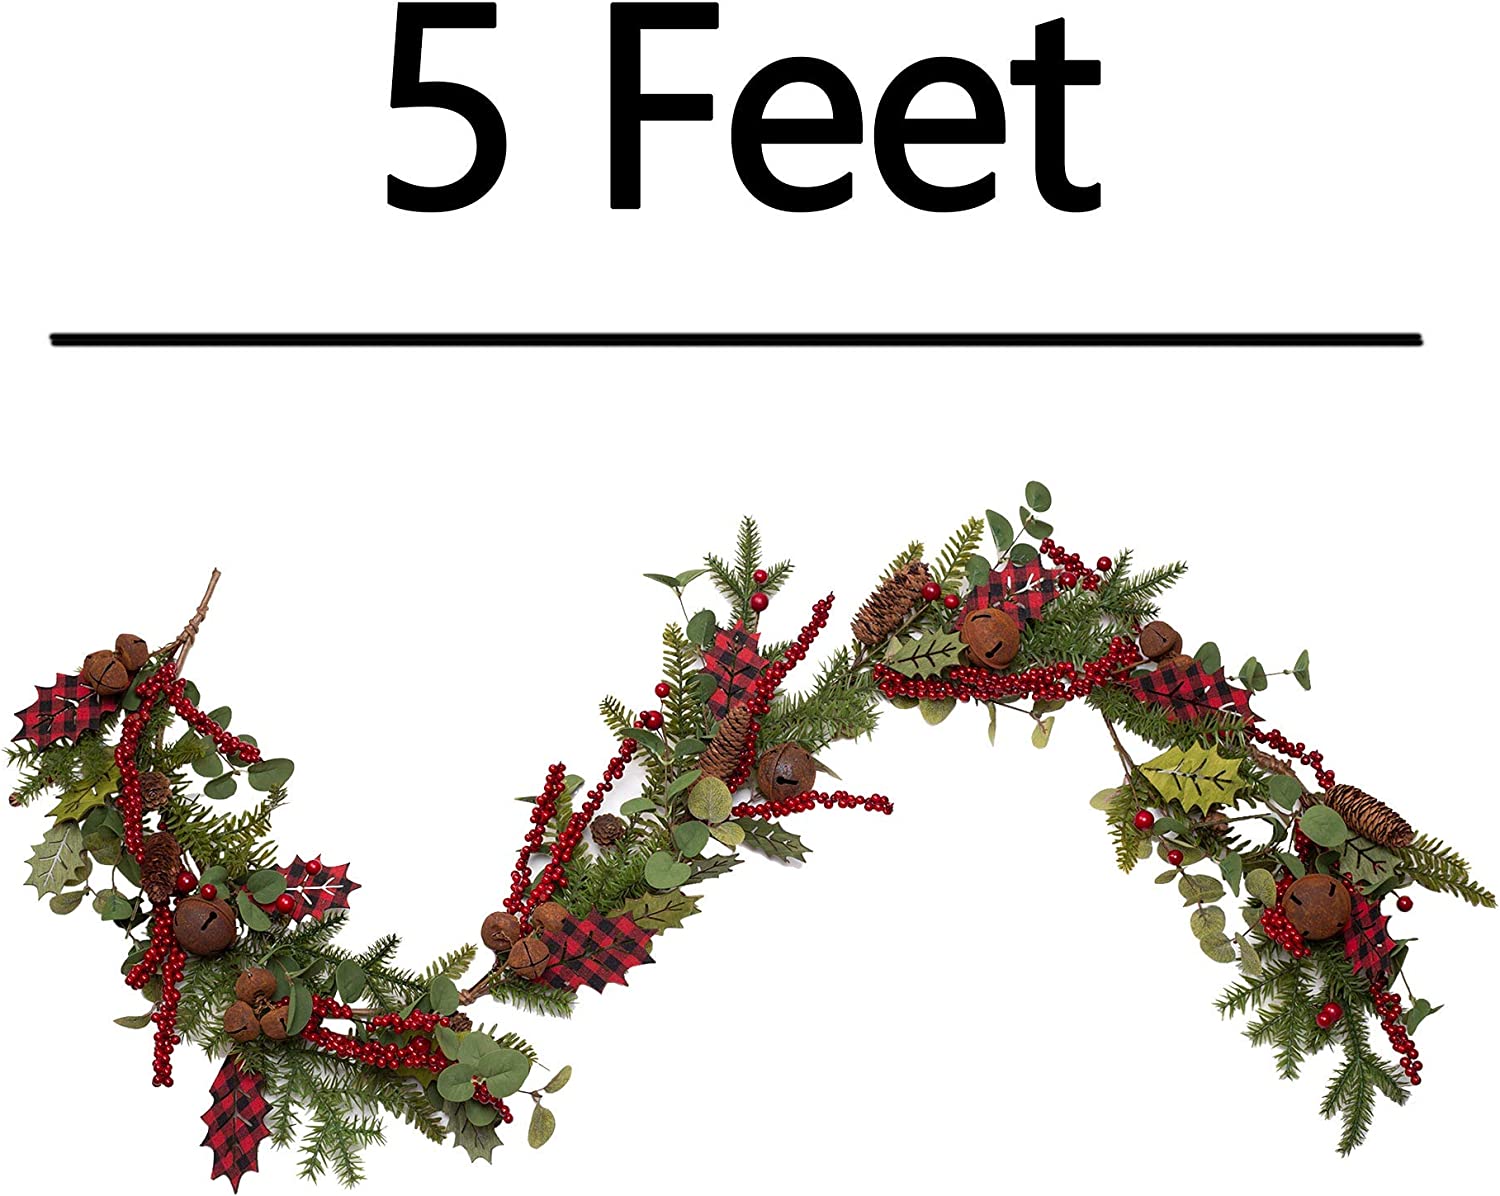 Artificial Christmas Garland from Amazon